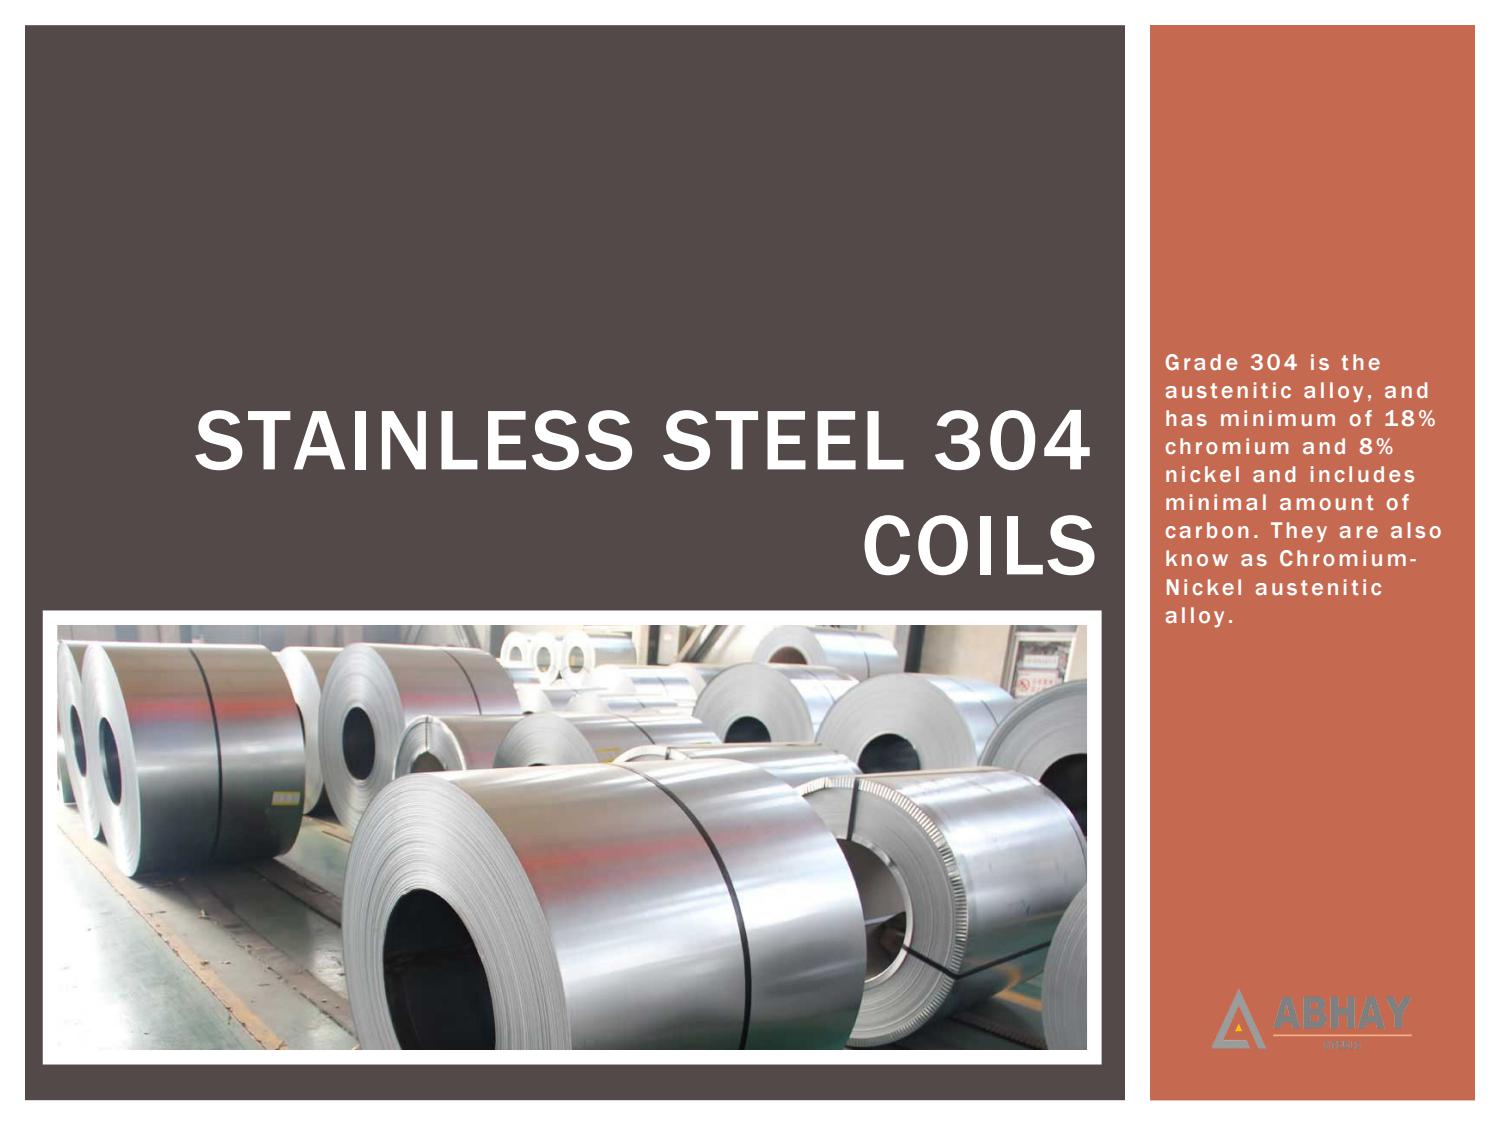 STAINLESS STEEL 304
COILS

Grade 304 is the
austenitic alloy, and
has minimum of 18%
chromium and 8%
nickel and includes
minimal amount of
carbon. They are also
know as Chromium-
Nickel austenitic
alloy.